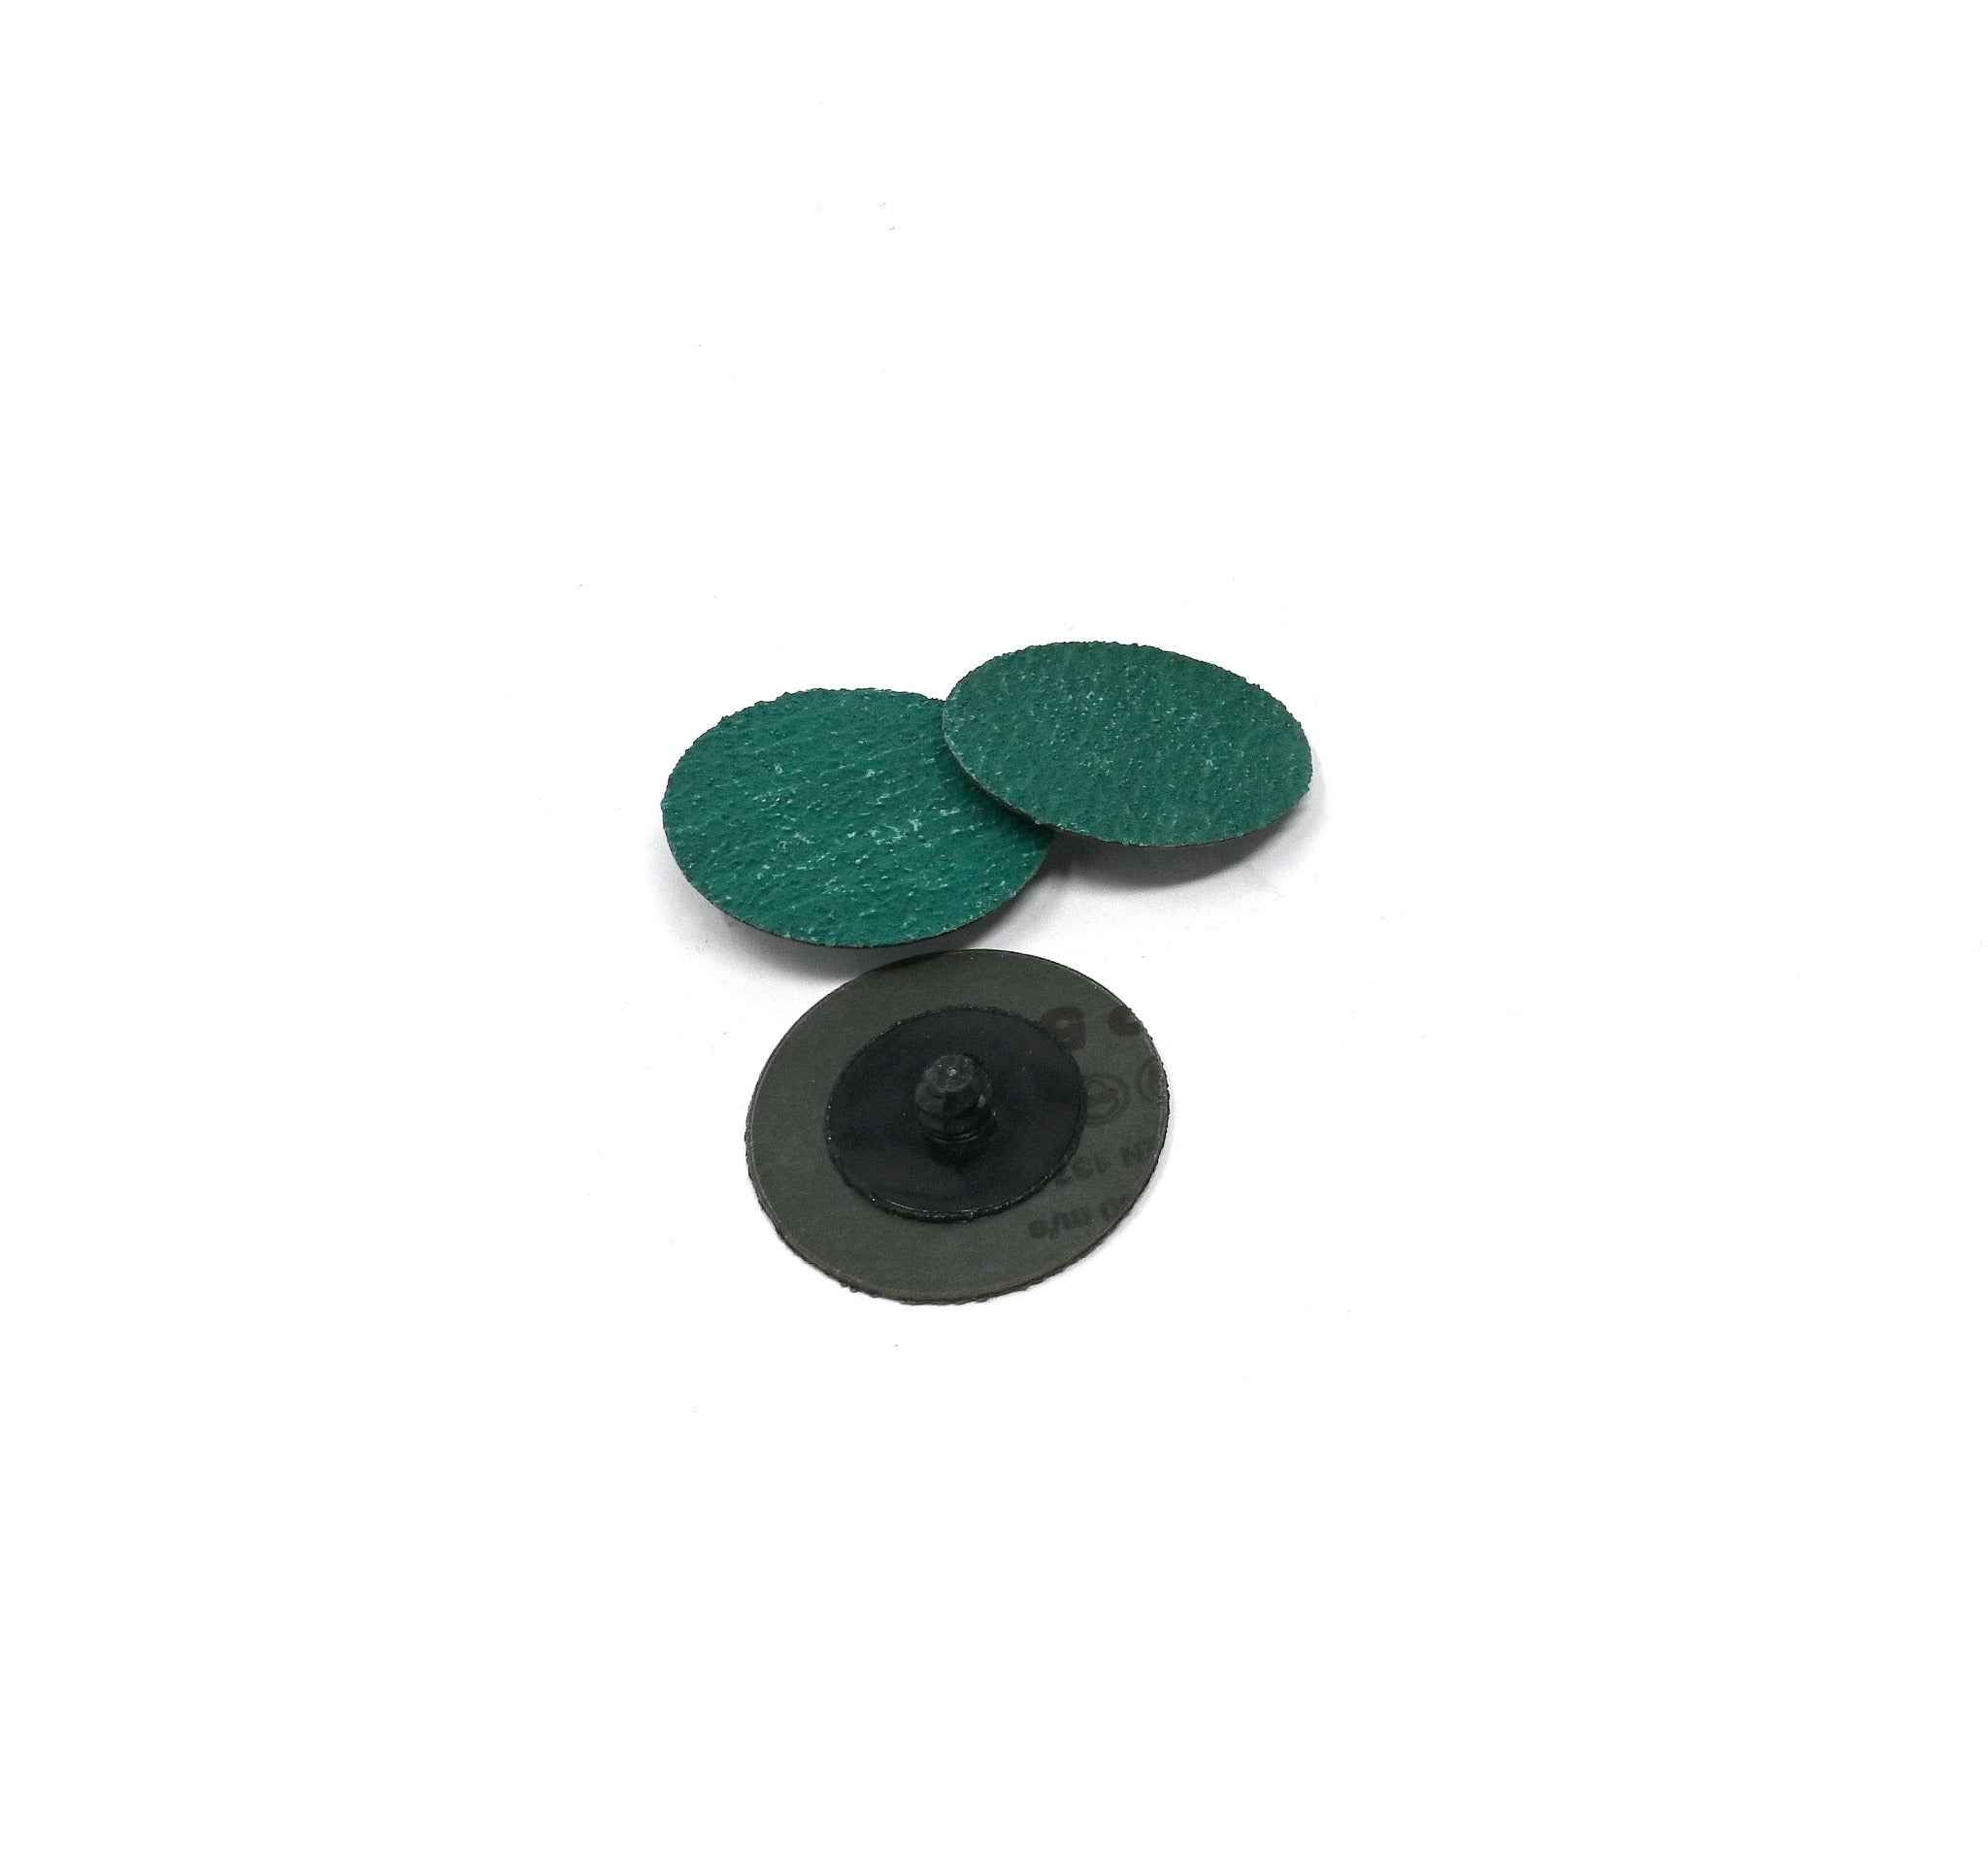 2" Green Zirconia 50 Grit Surface Conditioning Disc (Box of 25)